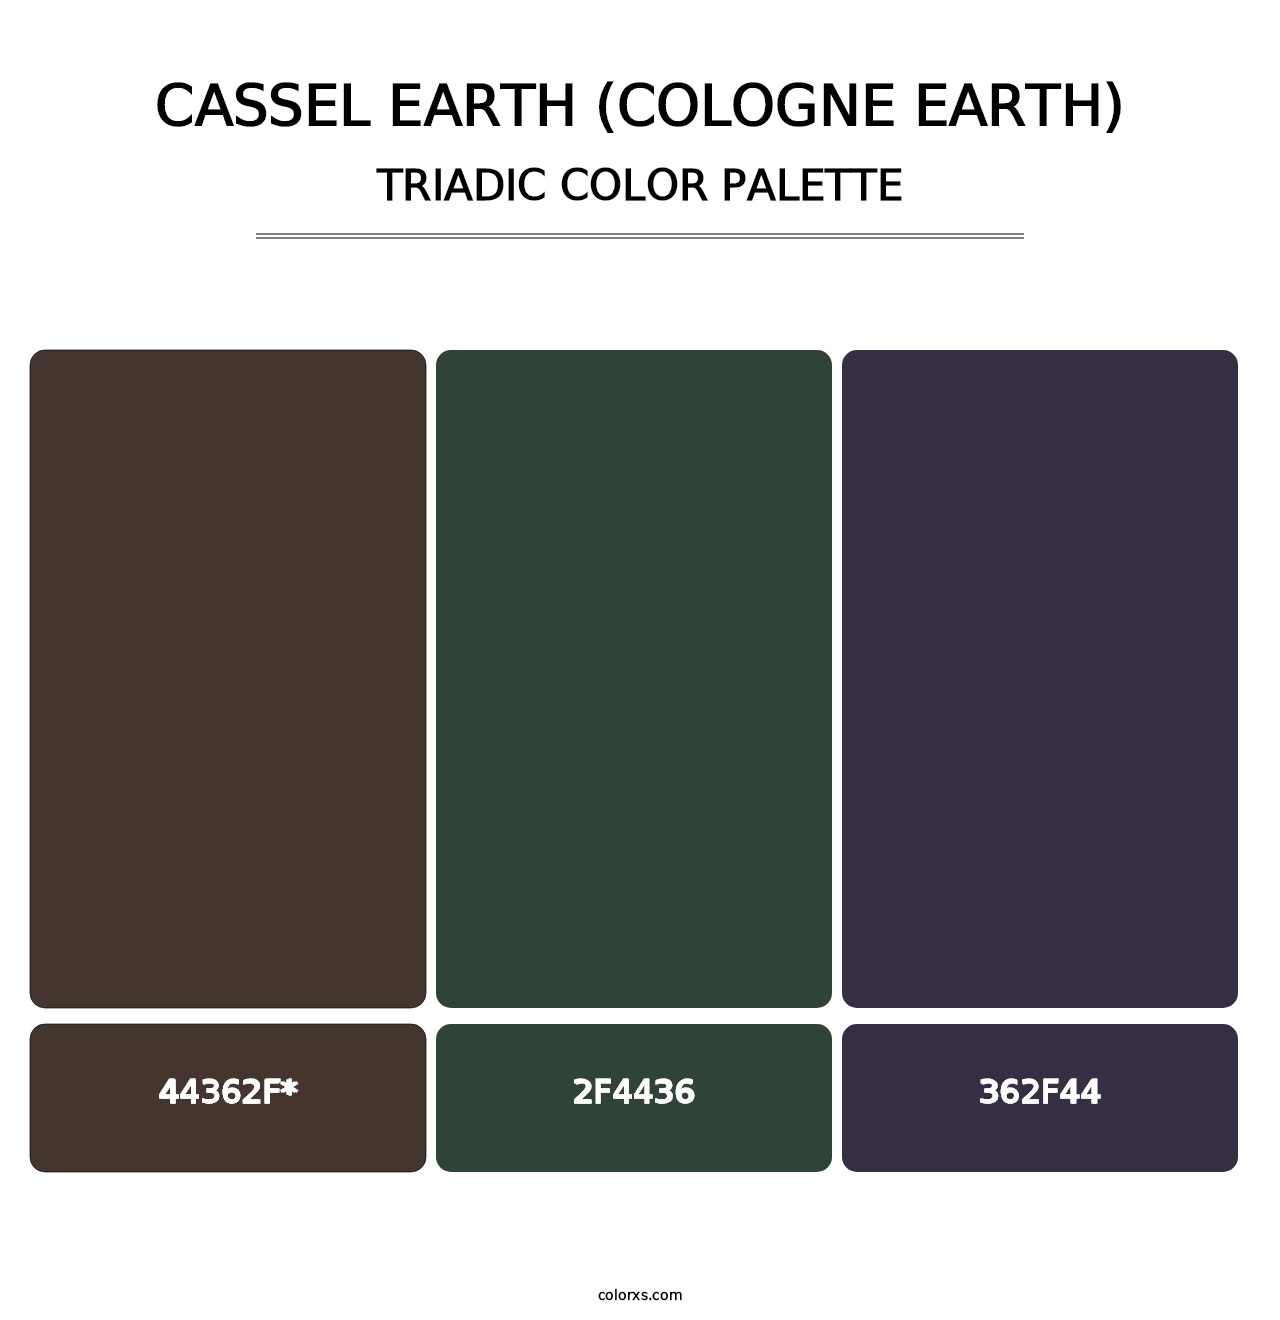 Cassel Earth (Cologne Earth) - Triadic Color Palette